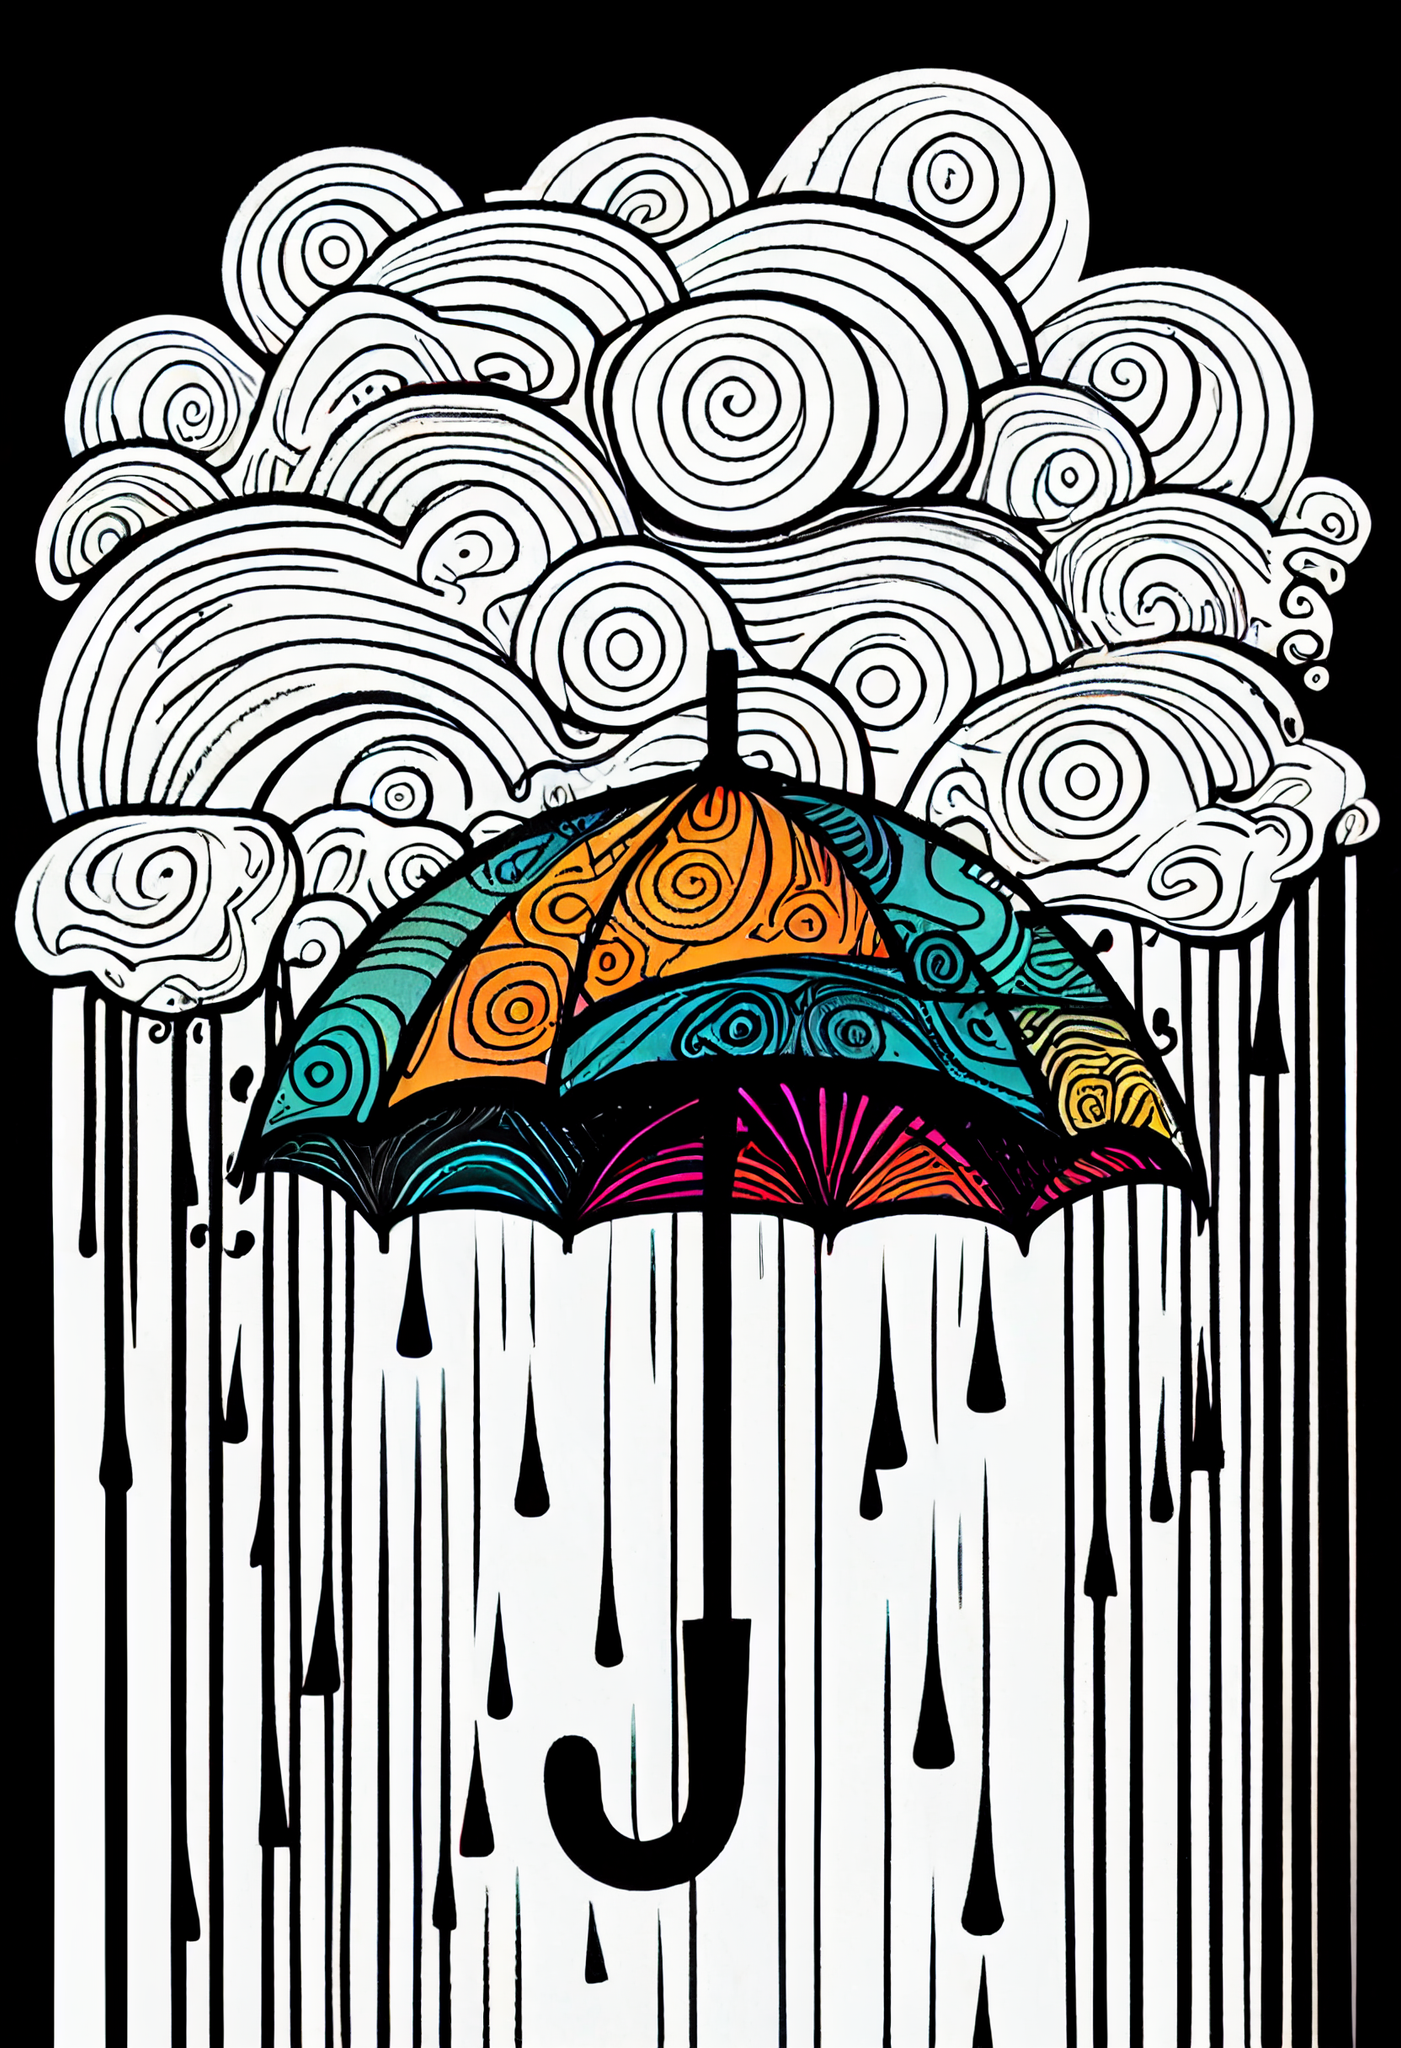 Whimsical Doodle Art Print of an Umbrella with Colorful Clouds